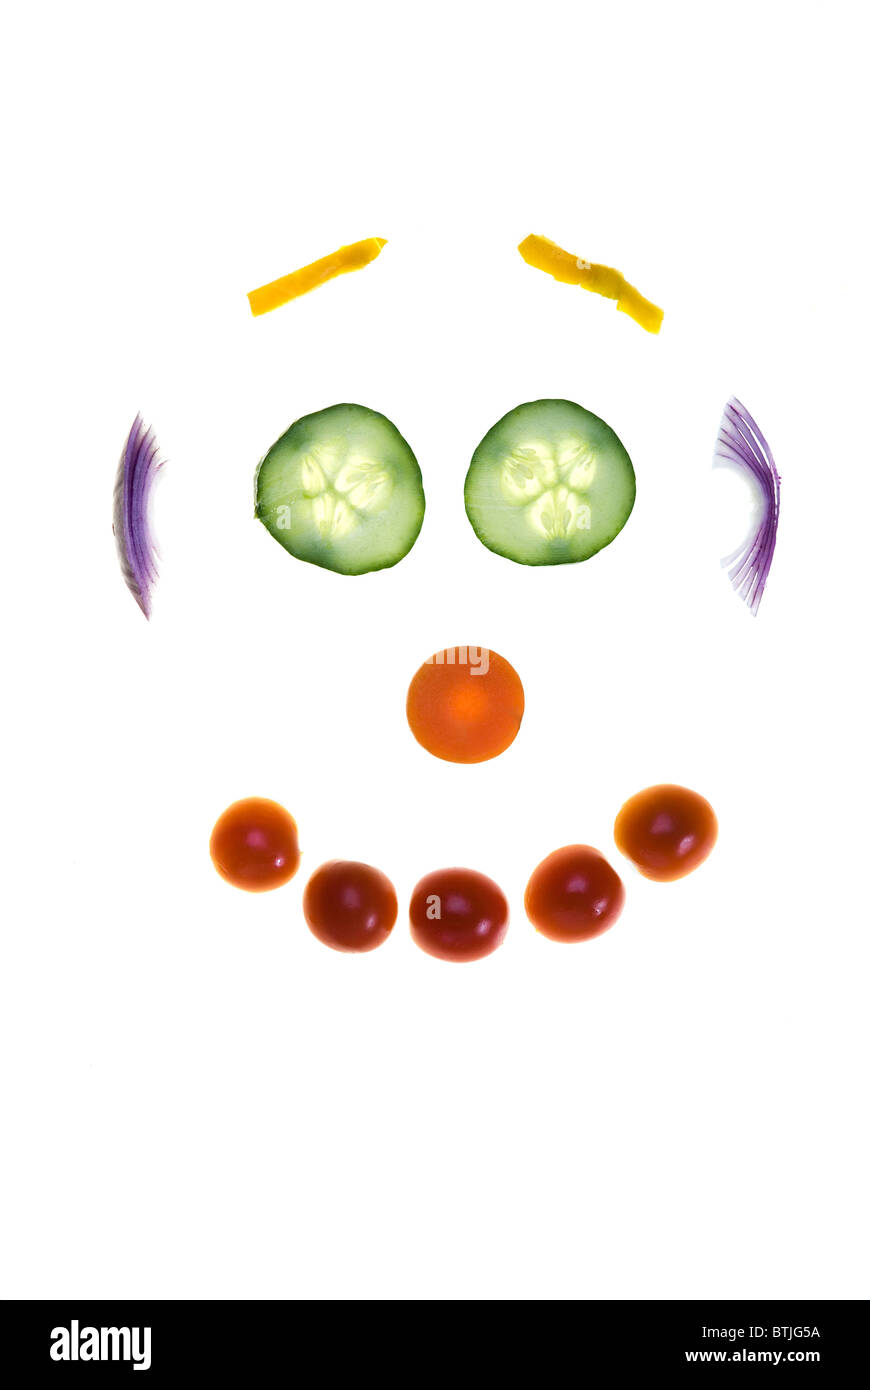 Face made up of vegetables. Stock Photo